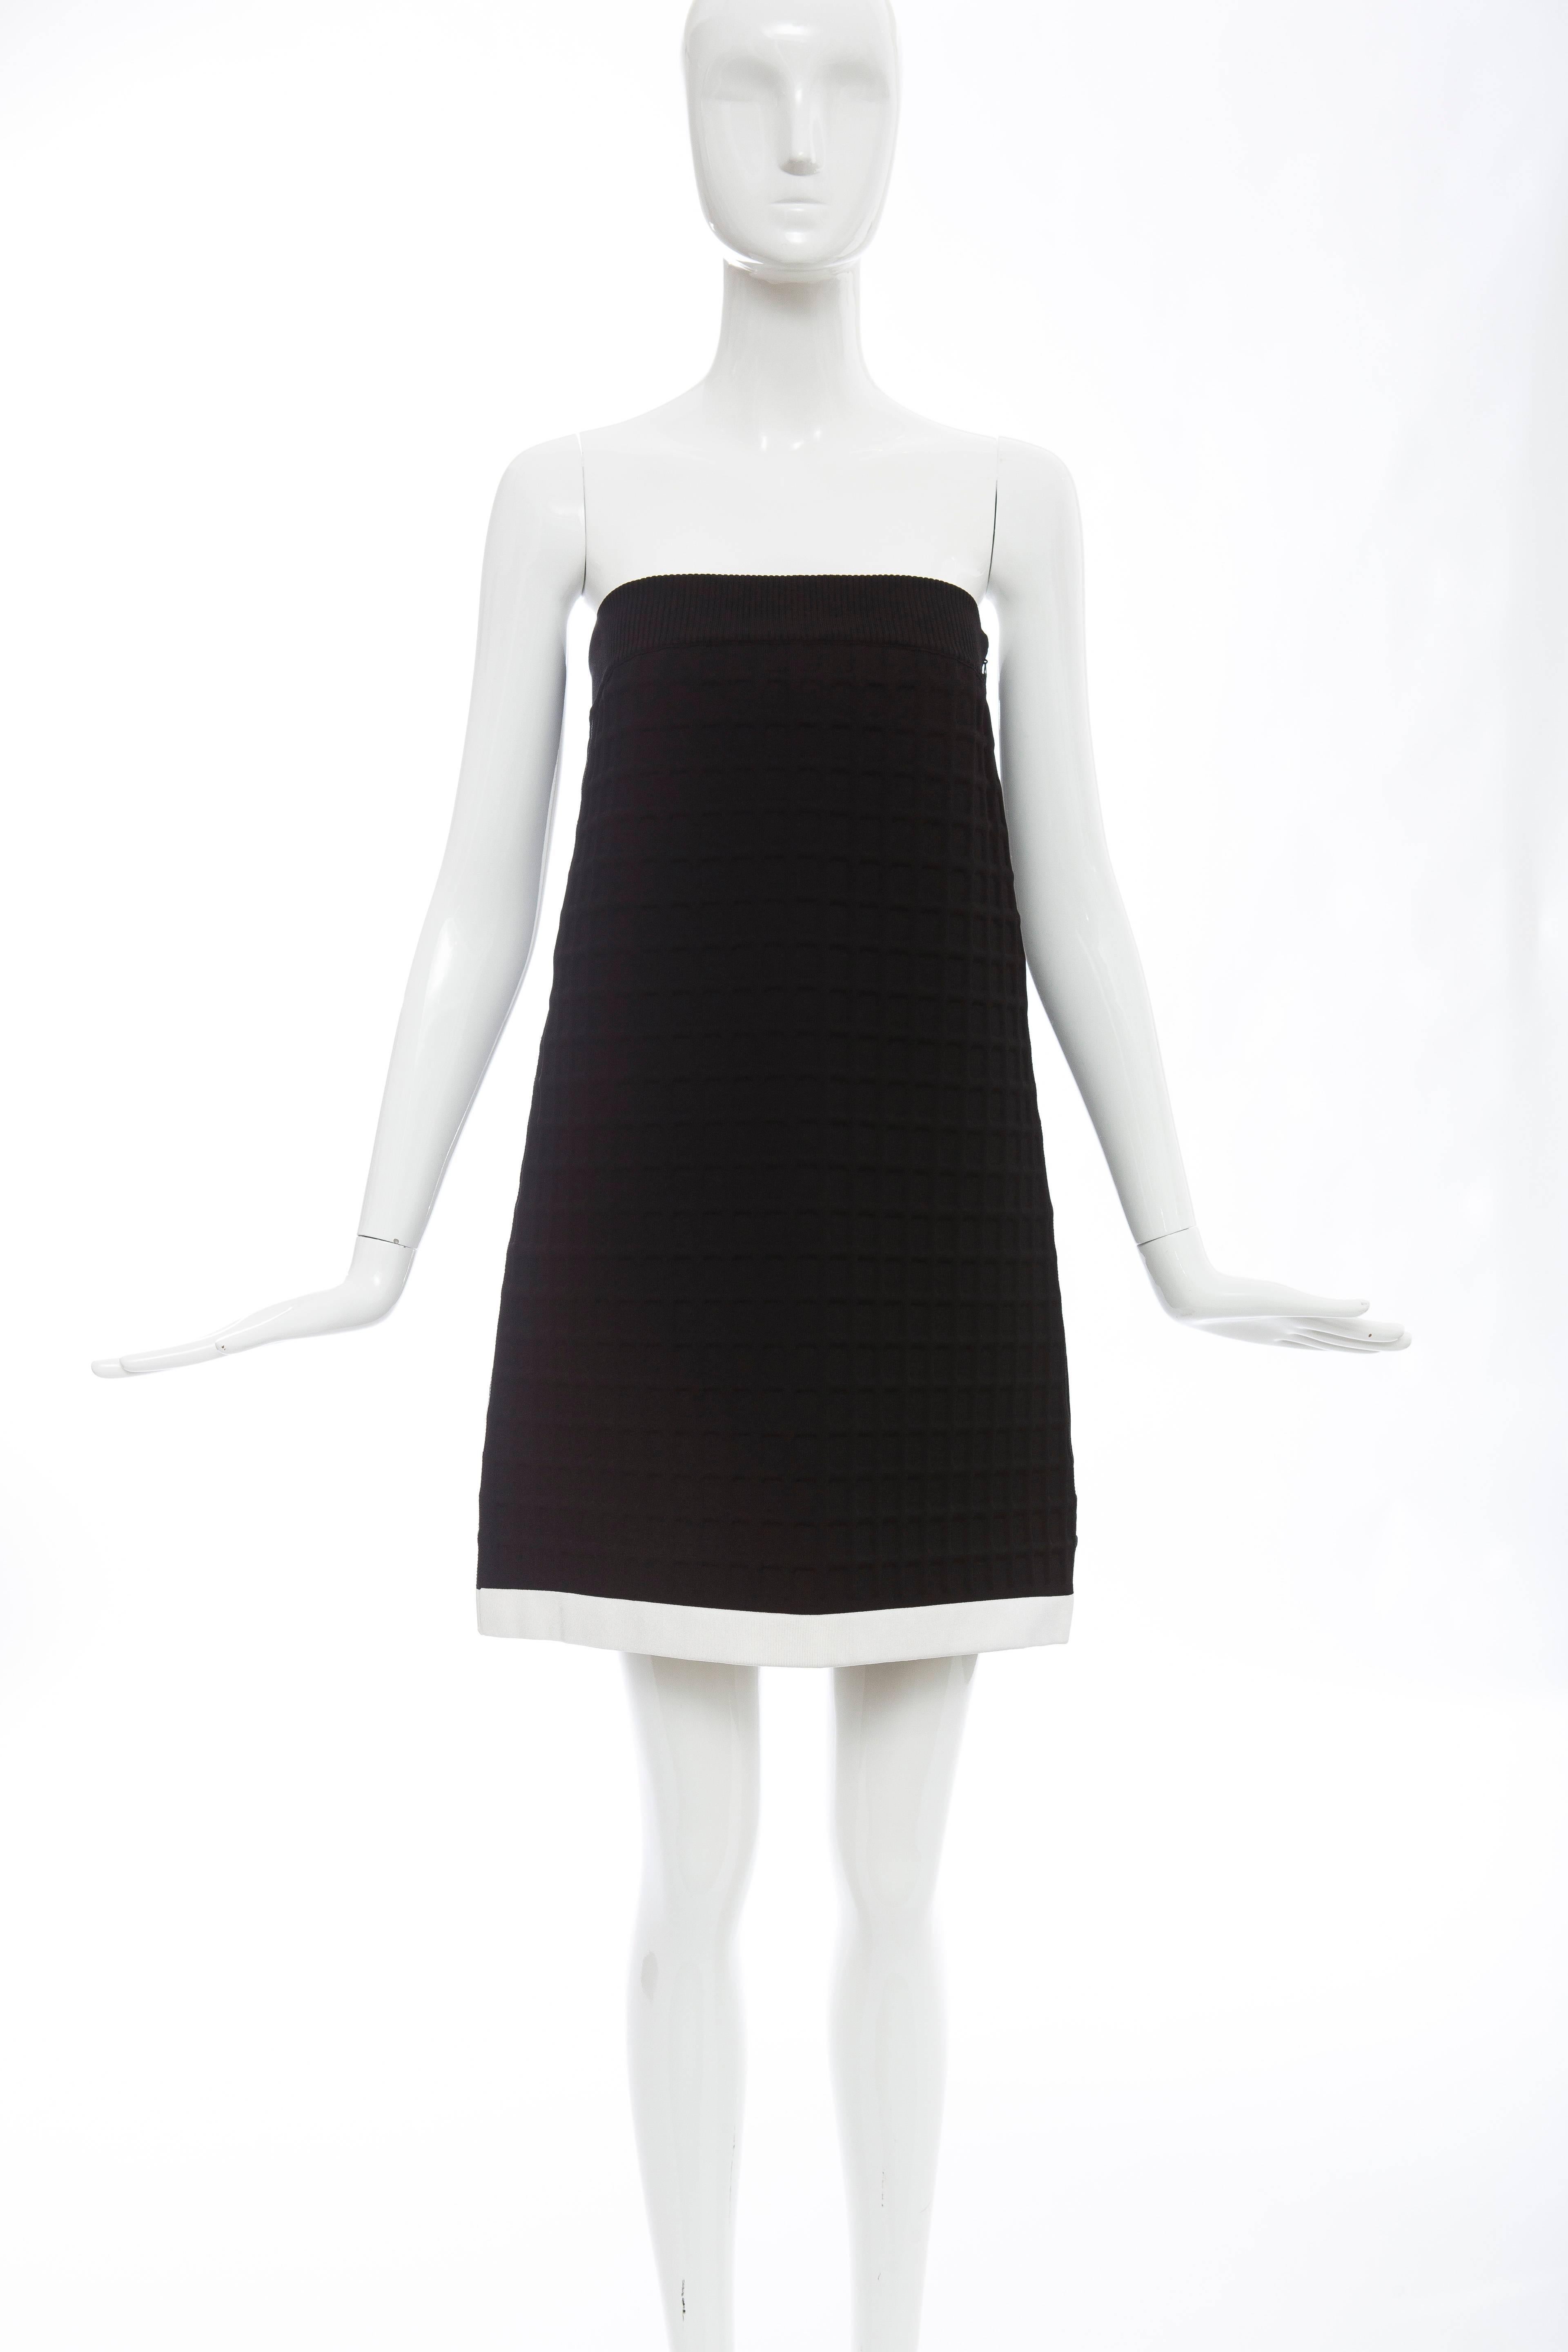 Chanel Runway Black Strapless Waffle Weave Pearl Button Back Dress, Spring 2013 In Excellent Condition For Sale In Cincinnati, OH